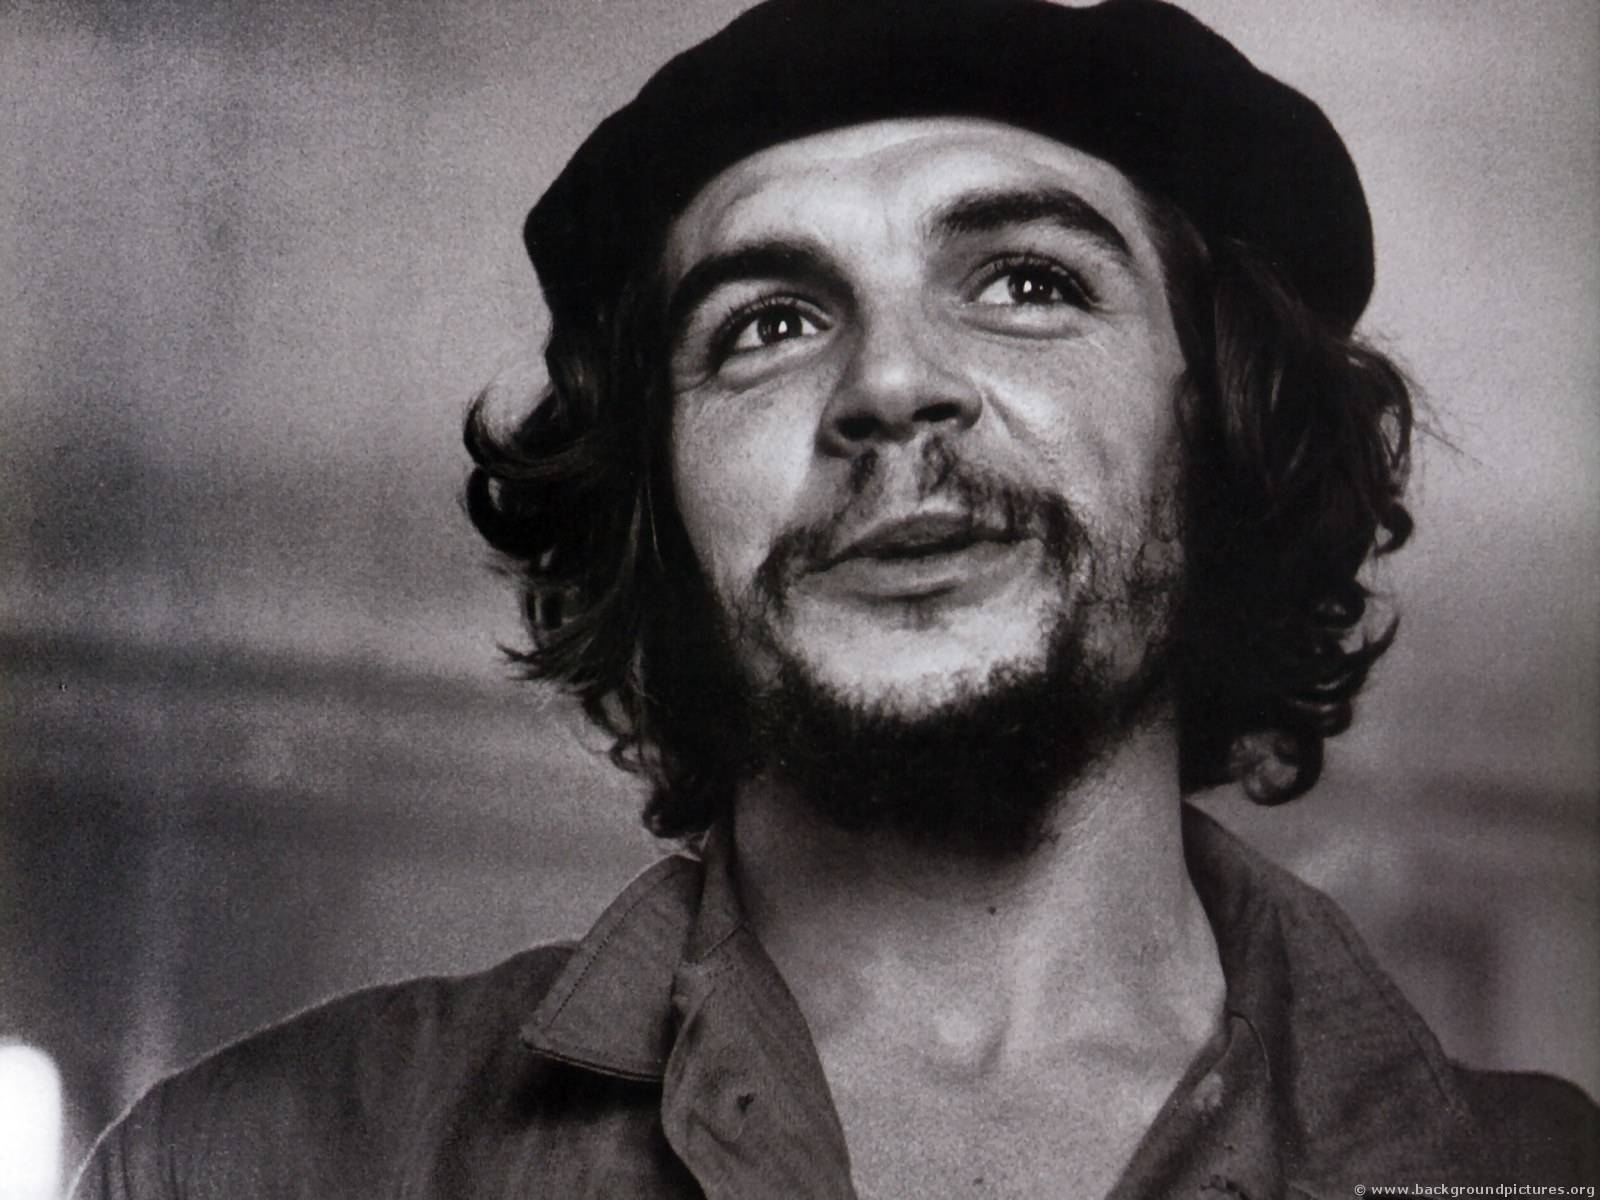 che guevara Wallpaper. tags: Che, cuba, picture on the wall